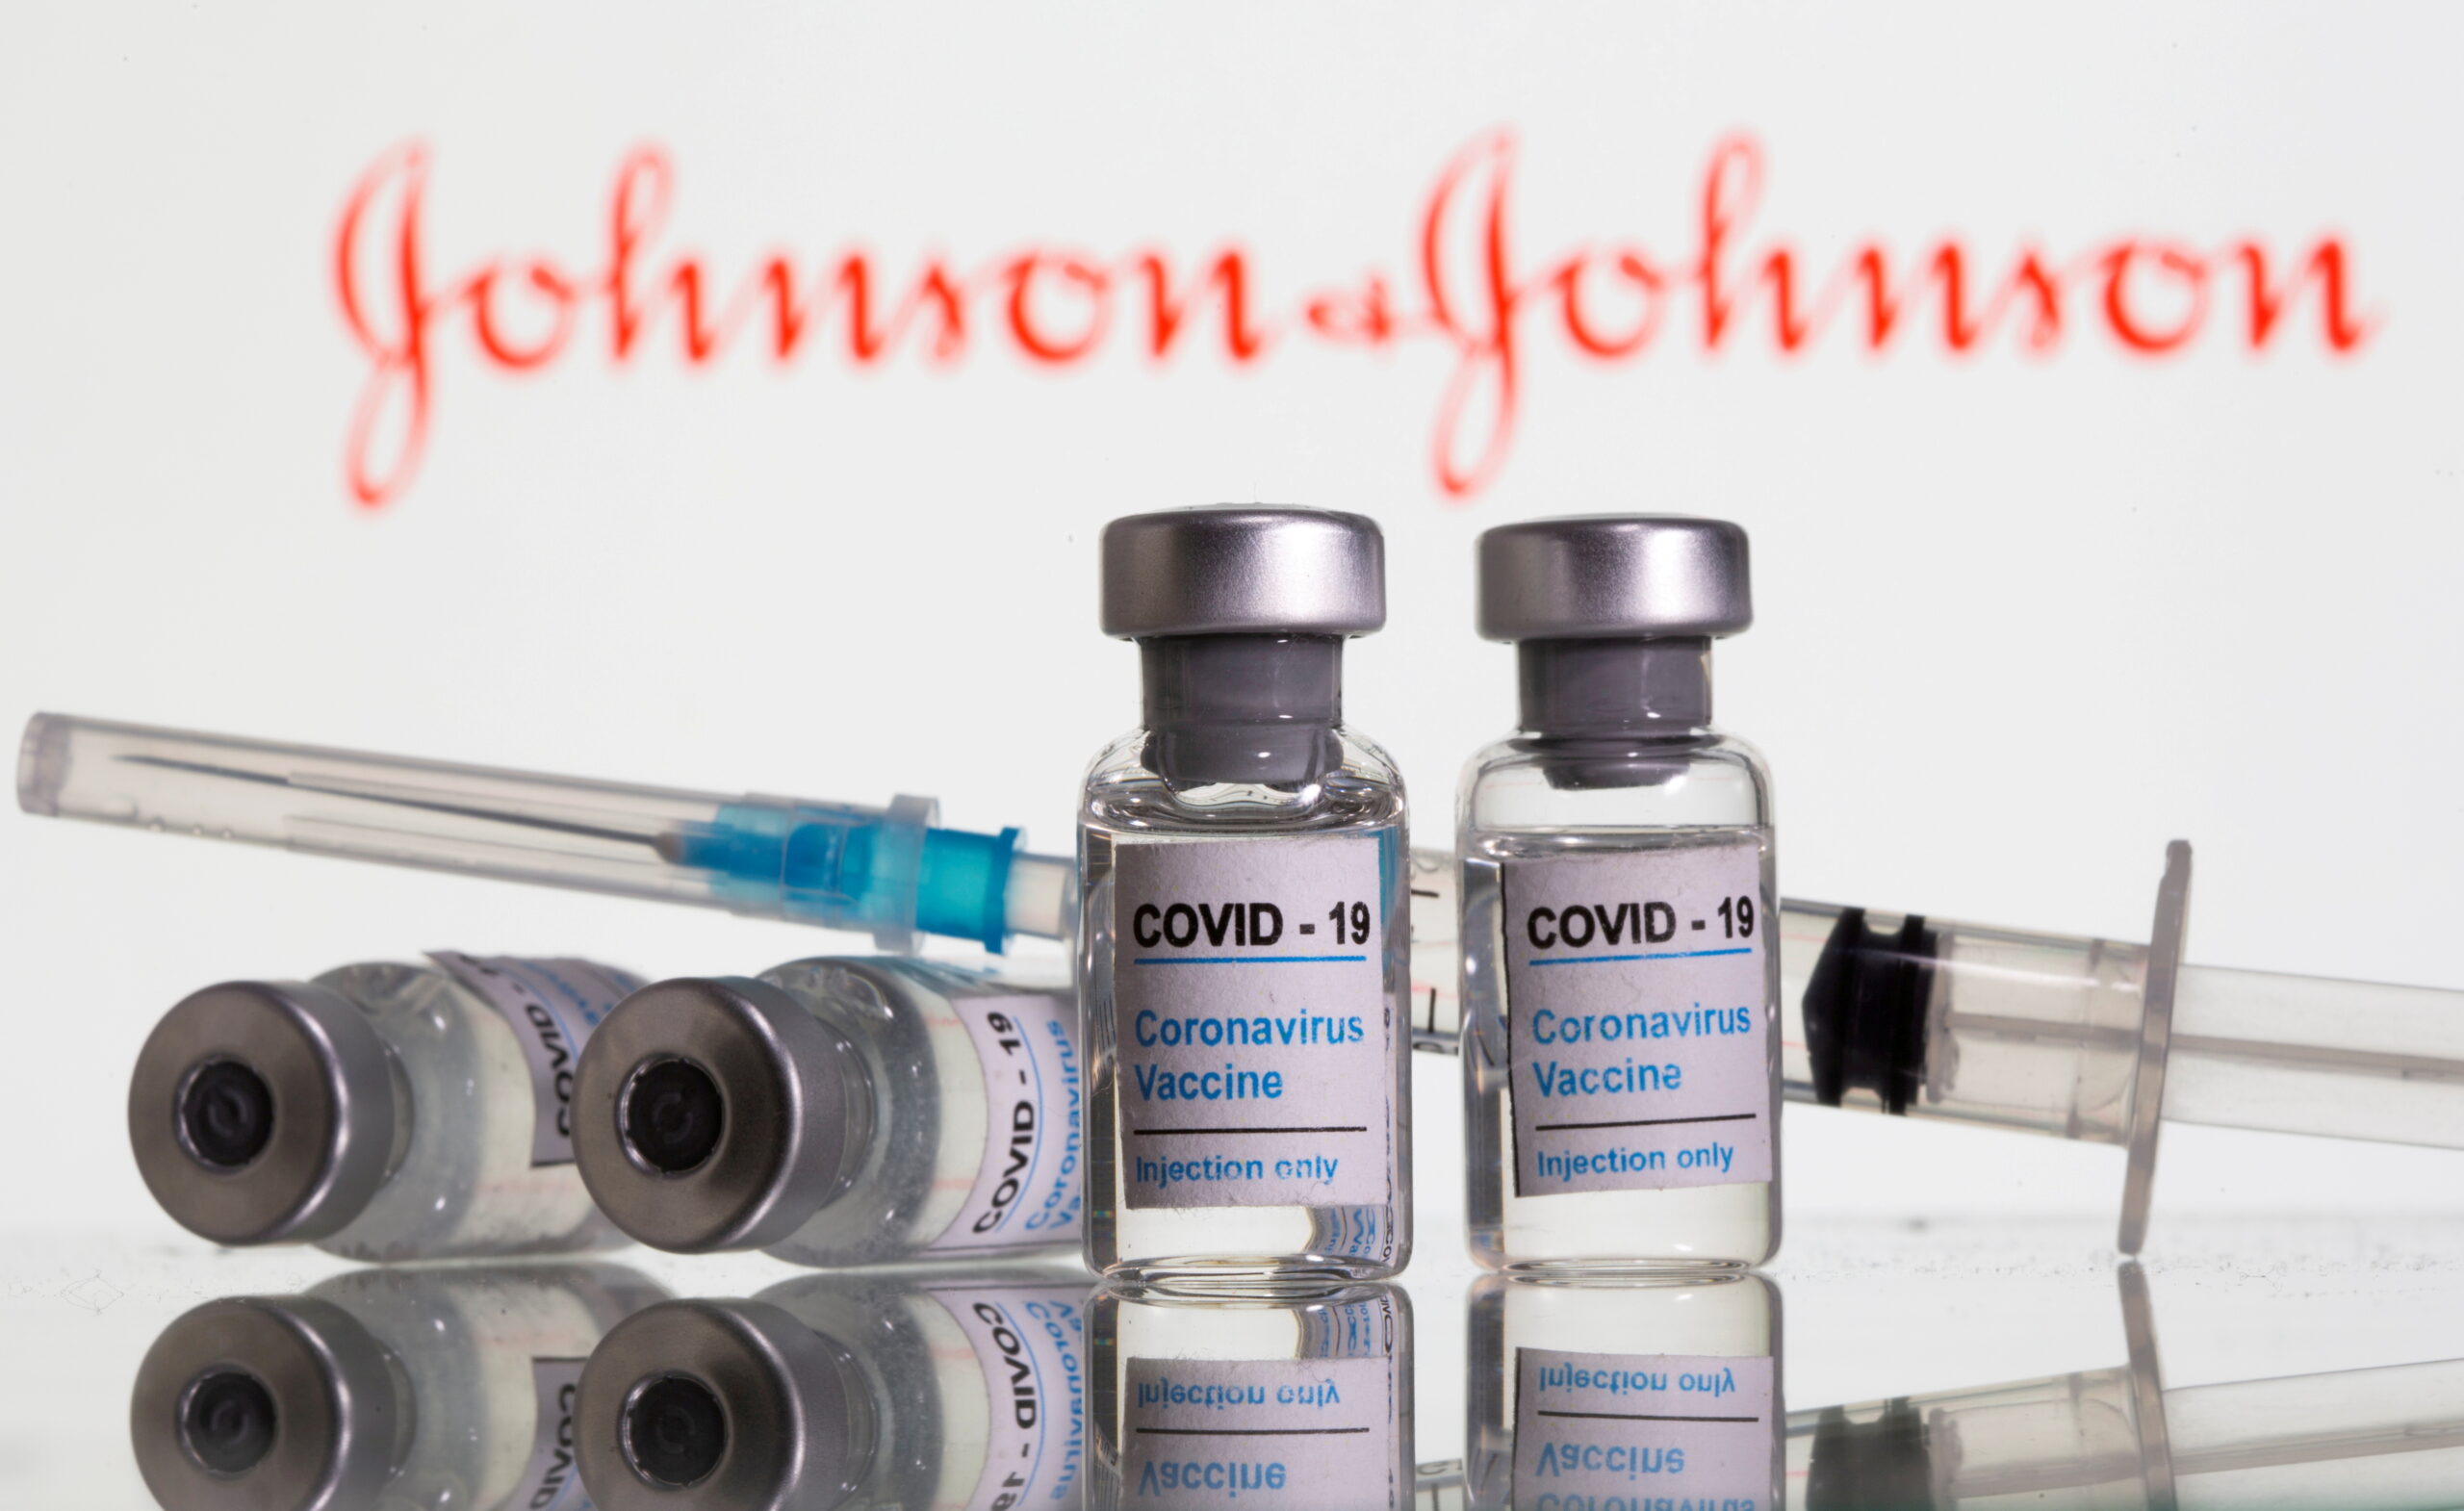  Moldova gets 500,000 doses of J&J’s COVID-19 vaccine from U.S. -State Dept.